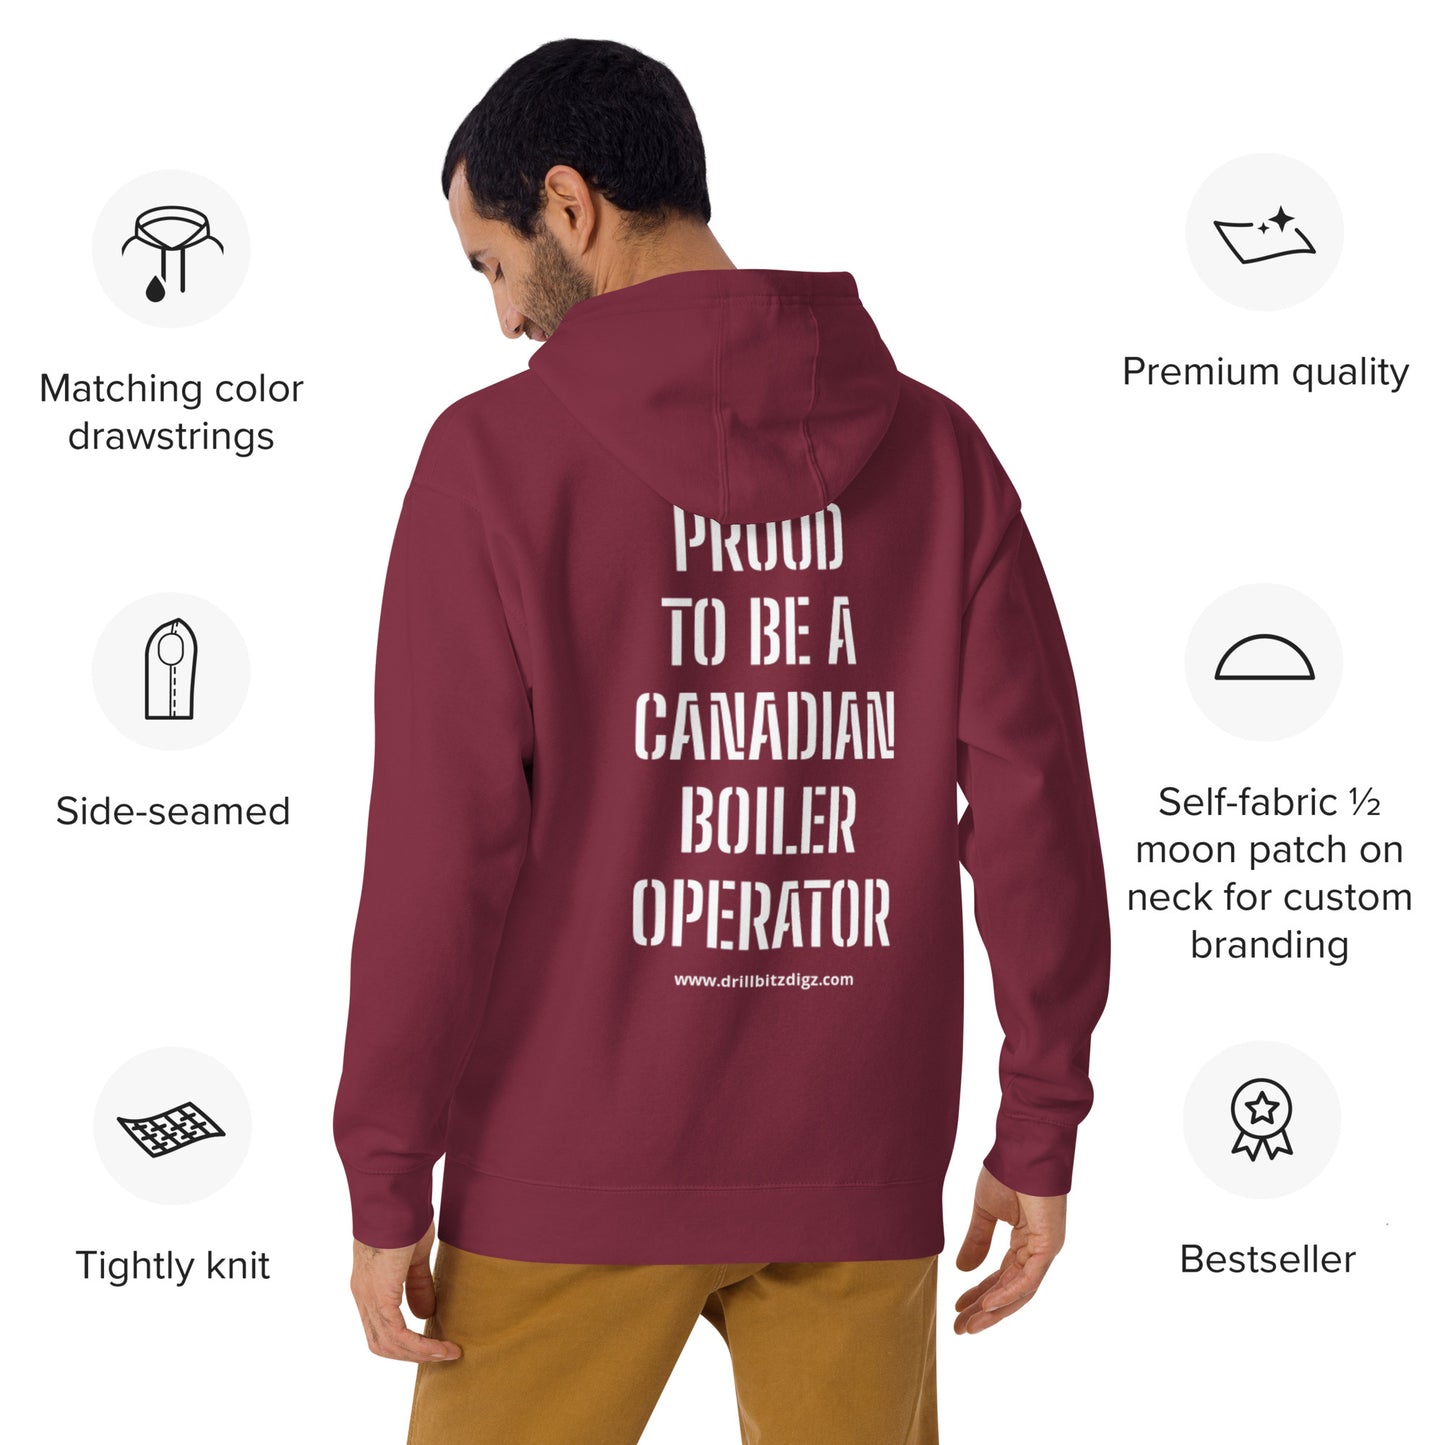 PROUD TO BE A CANADIAN BOILER OPERATOR Hoodie